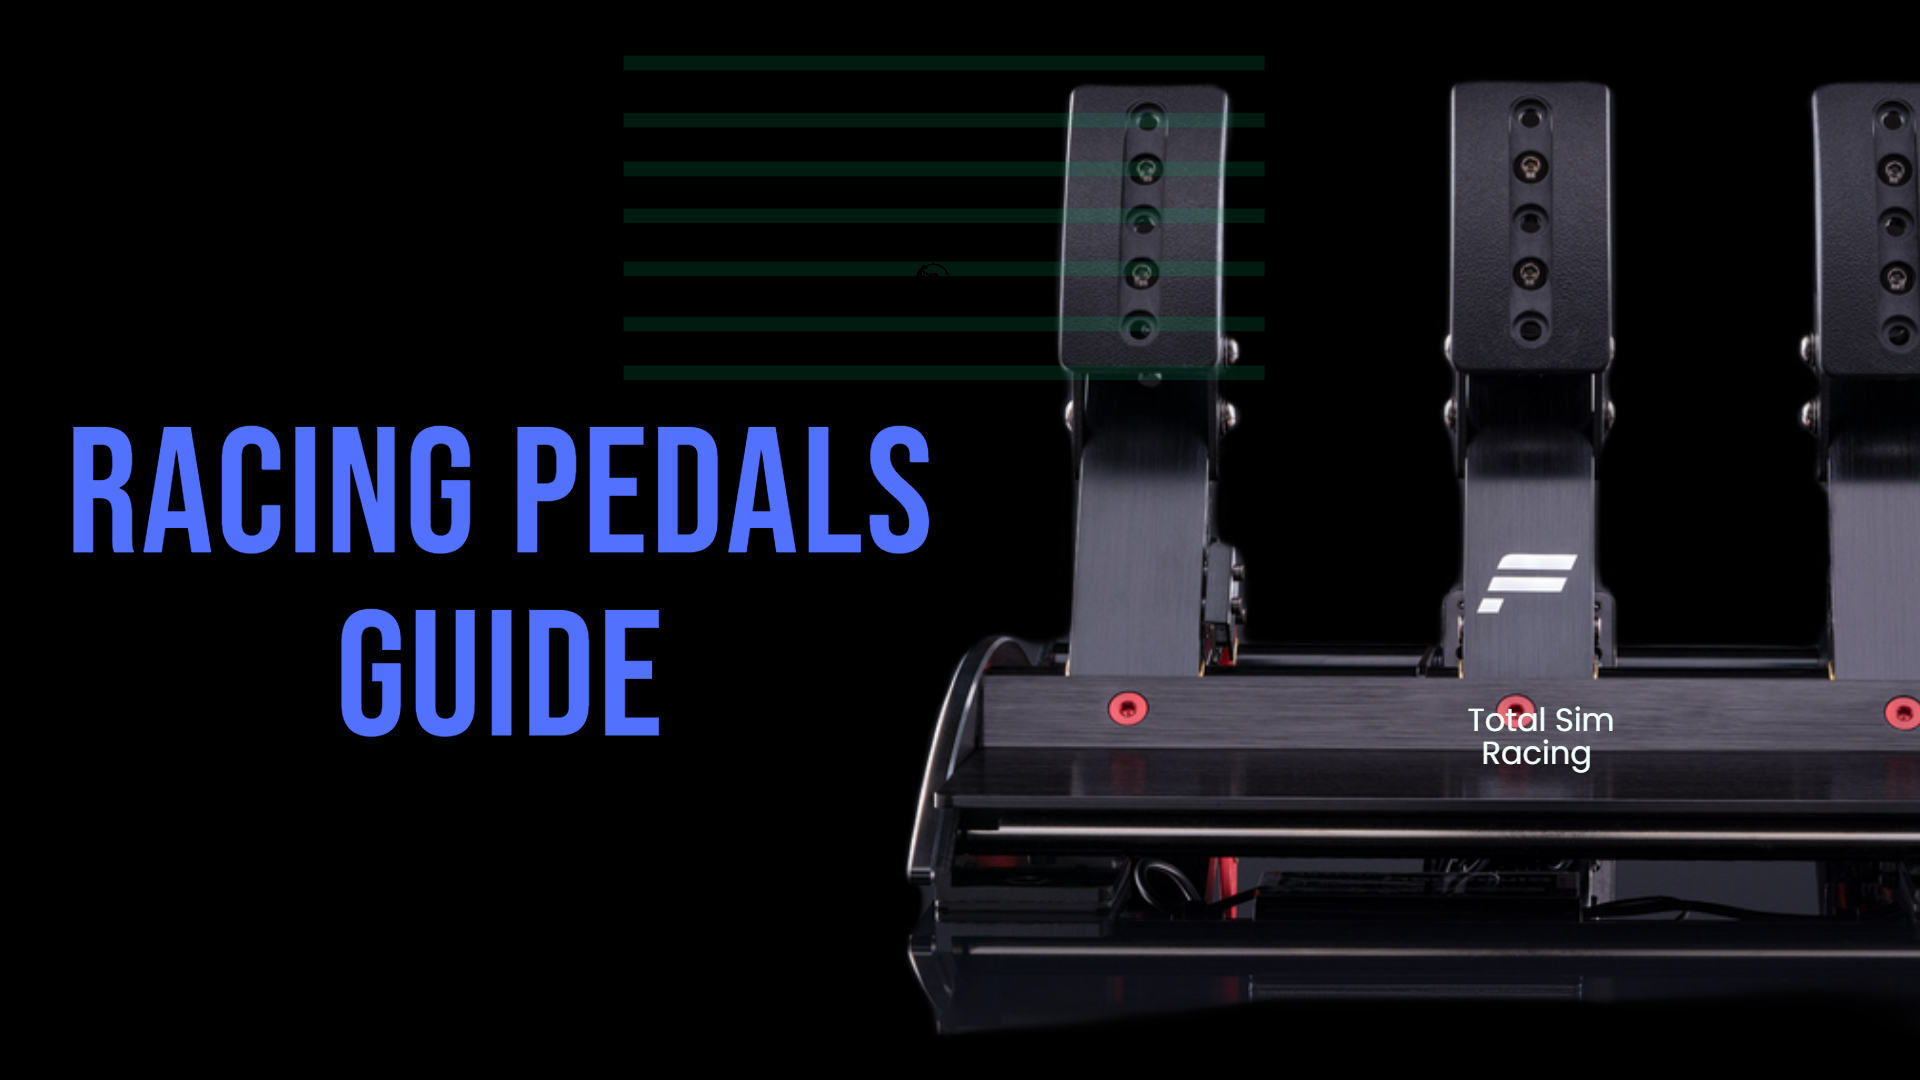 Racing Pedals Buying Guide